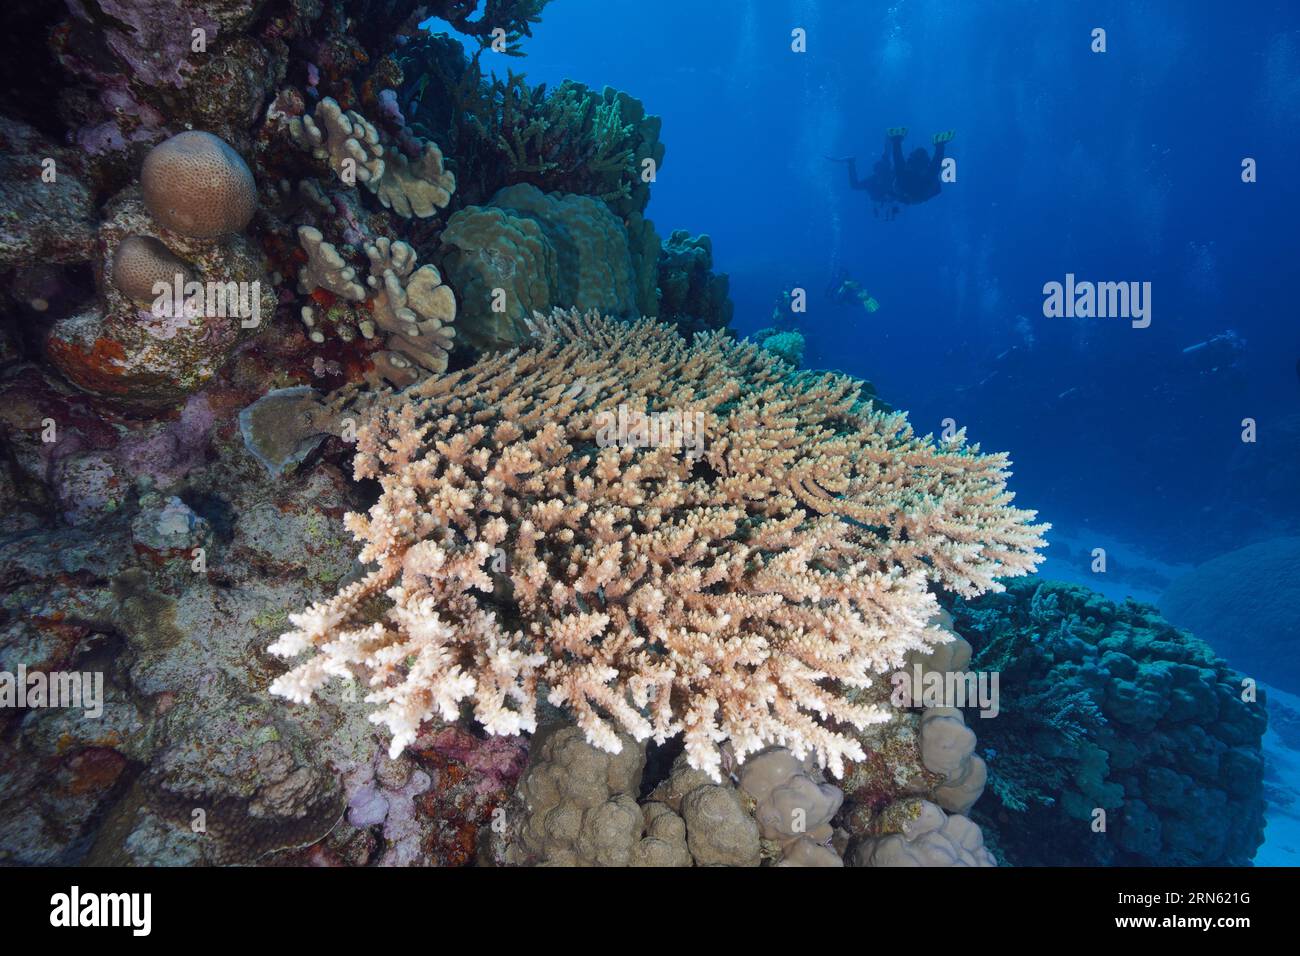 Staghorn coral (Acropora), diver in the background, Fury Shoals reef dive site, Red Sea, Egypt Stock Photo